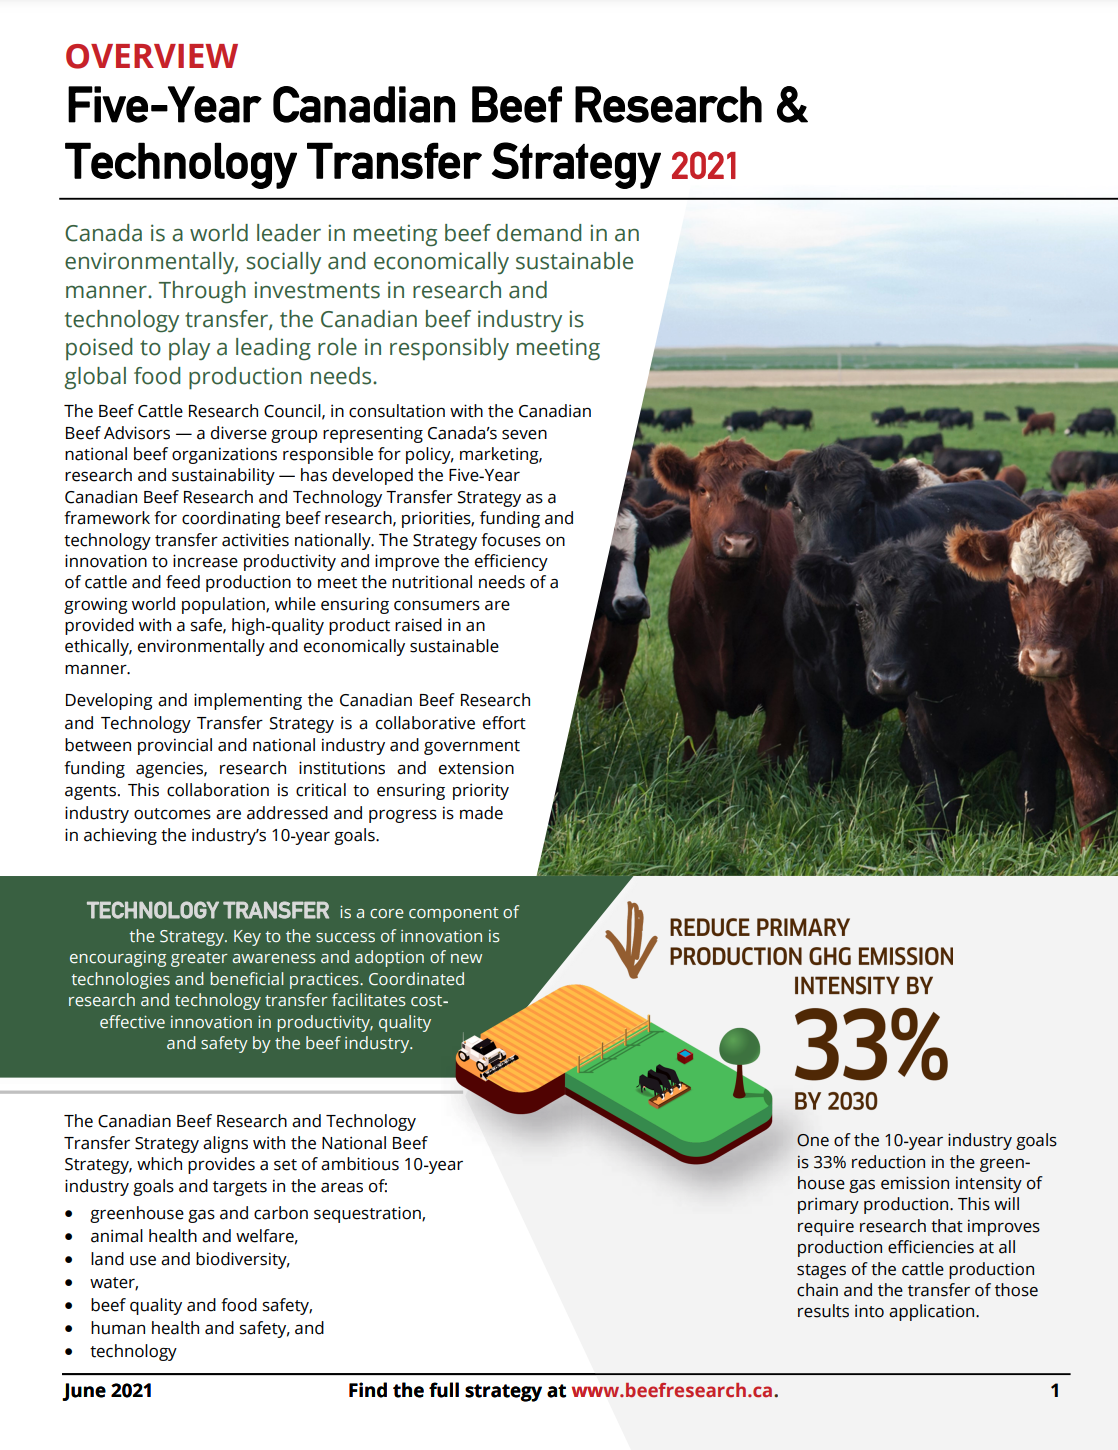 Five-Year Canadian Beef Research & Technology Transfer Strategy